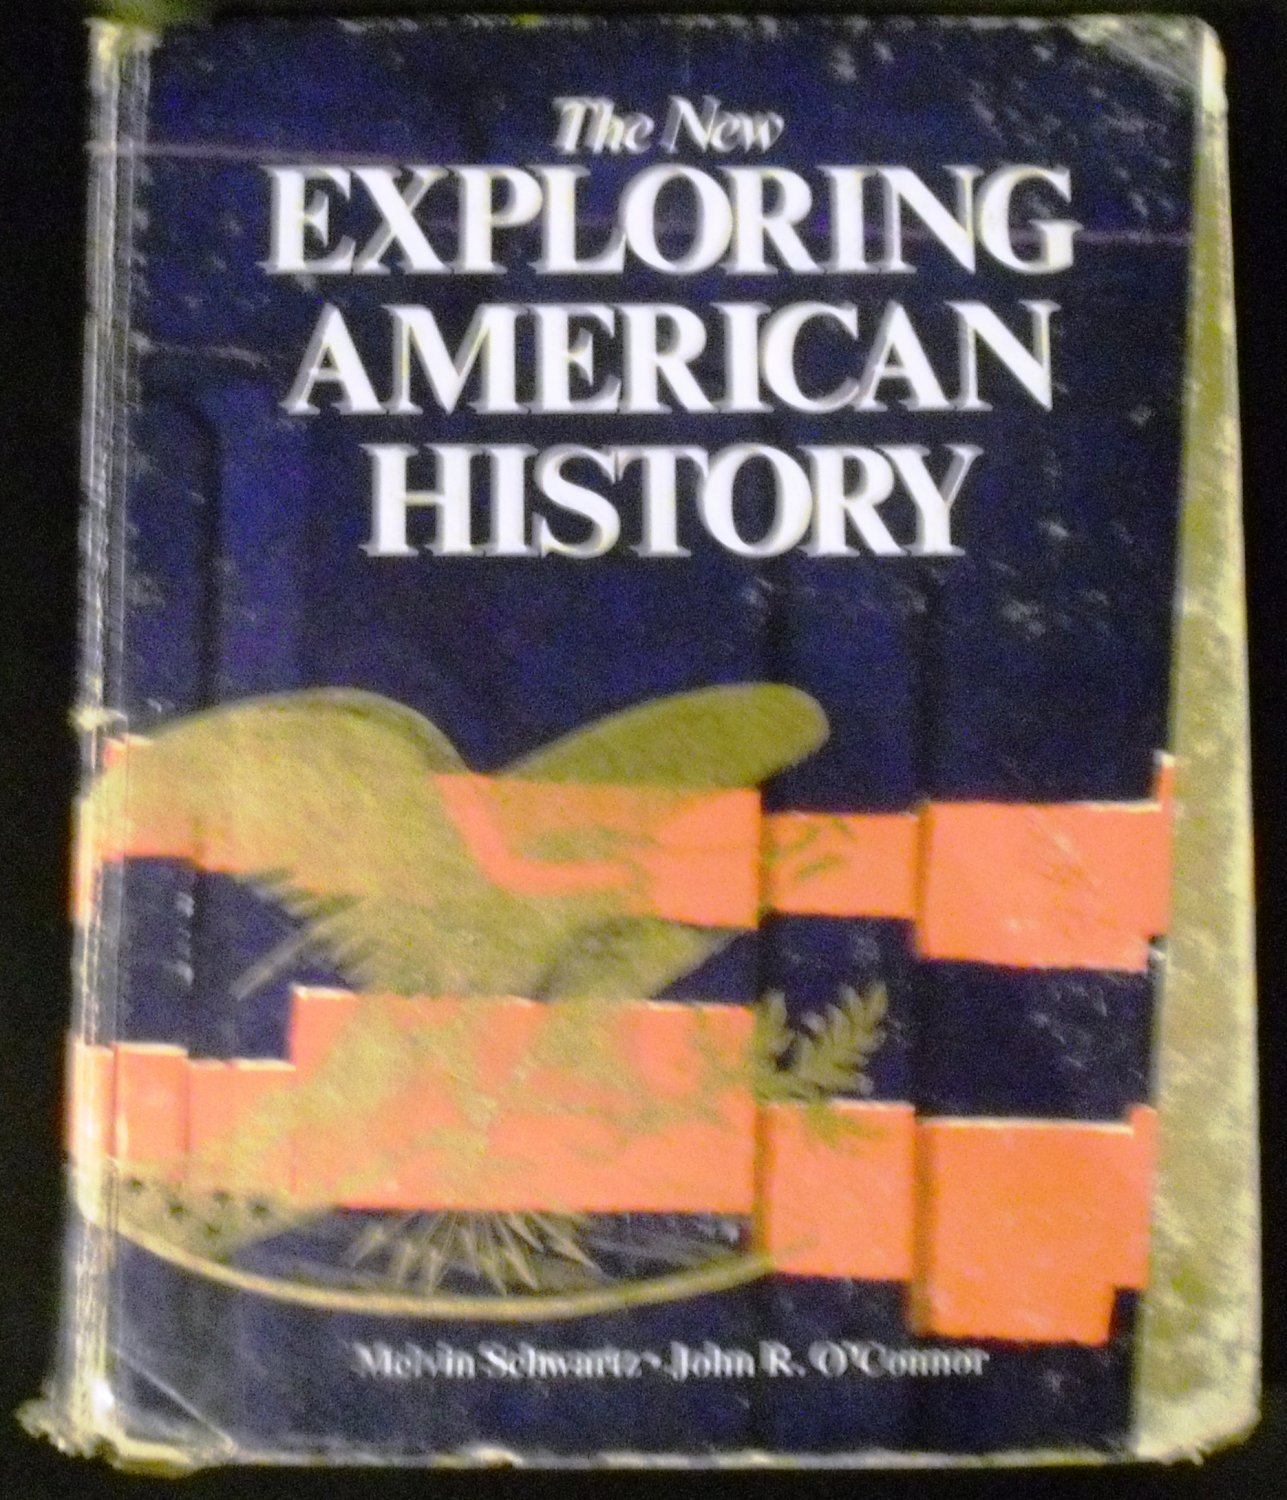 The New Exploring American History by Melvin Schwartz (1981)